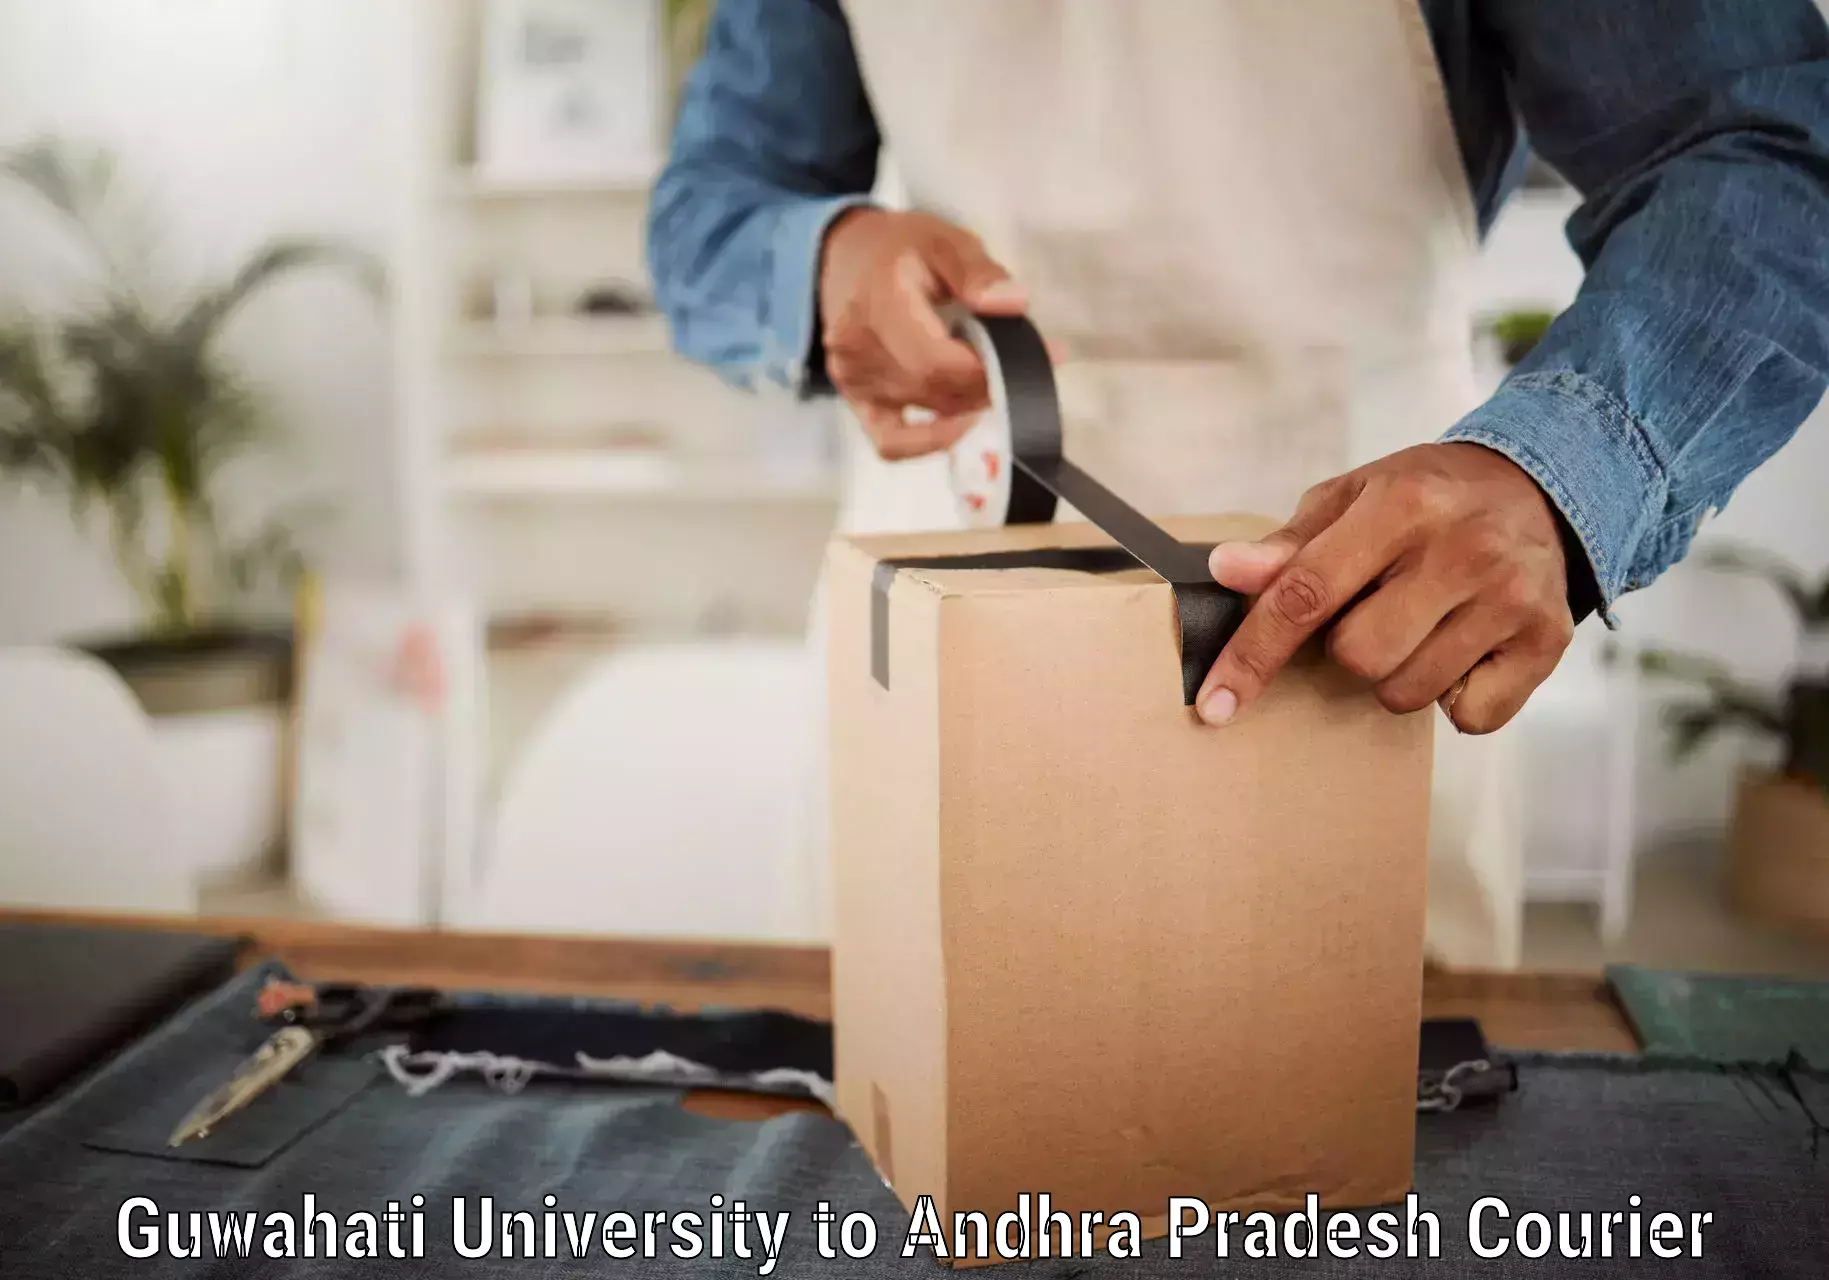 Personalized courier experiences in Guwahati University to Velgodu